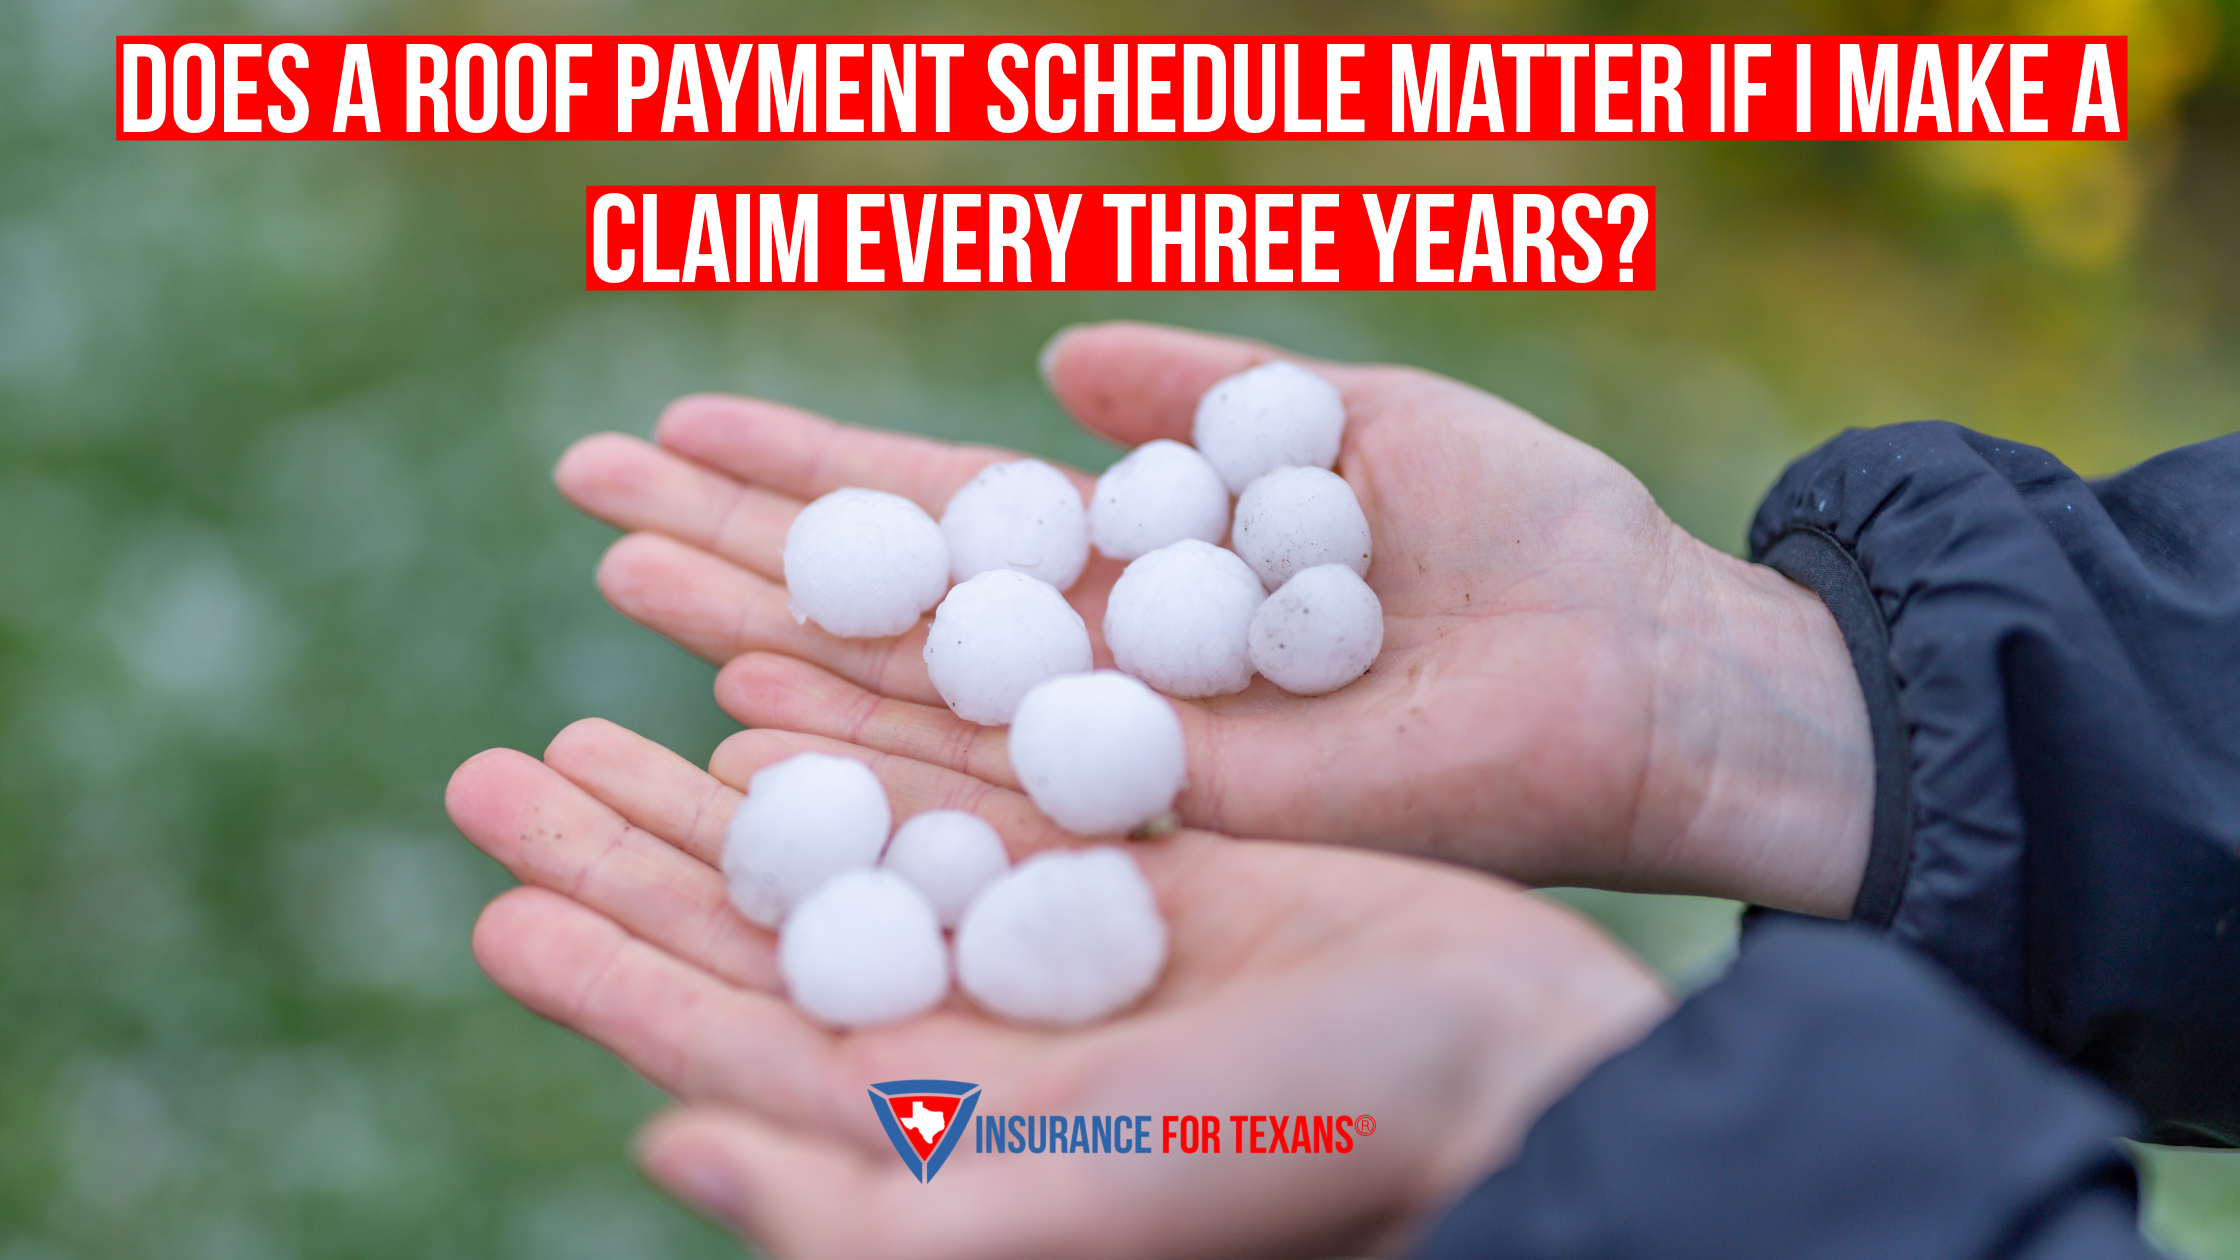 Does A Roof Payment Schedule Matter If I Make A Claim Every Three Years?